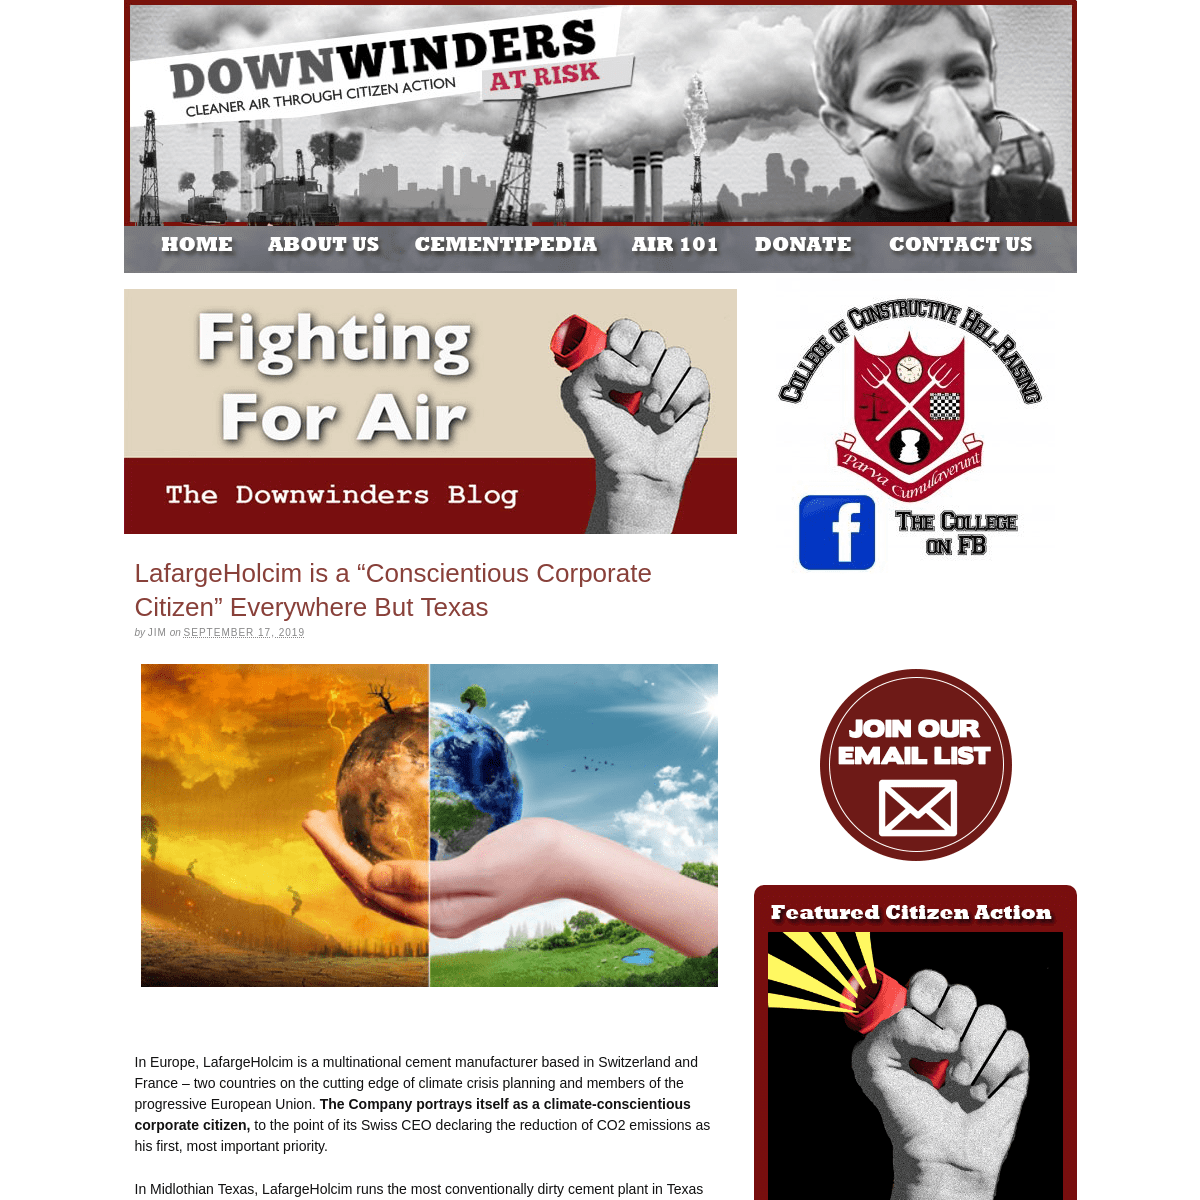 Downwinders at Risk — Cleaner Air Through Citizen Action